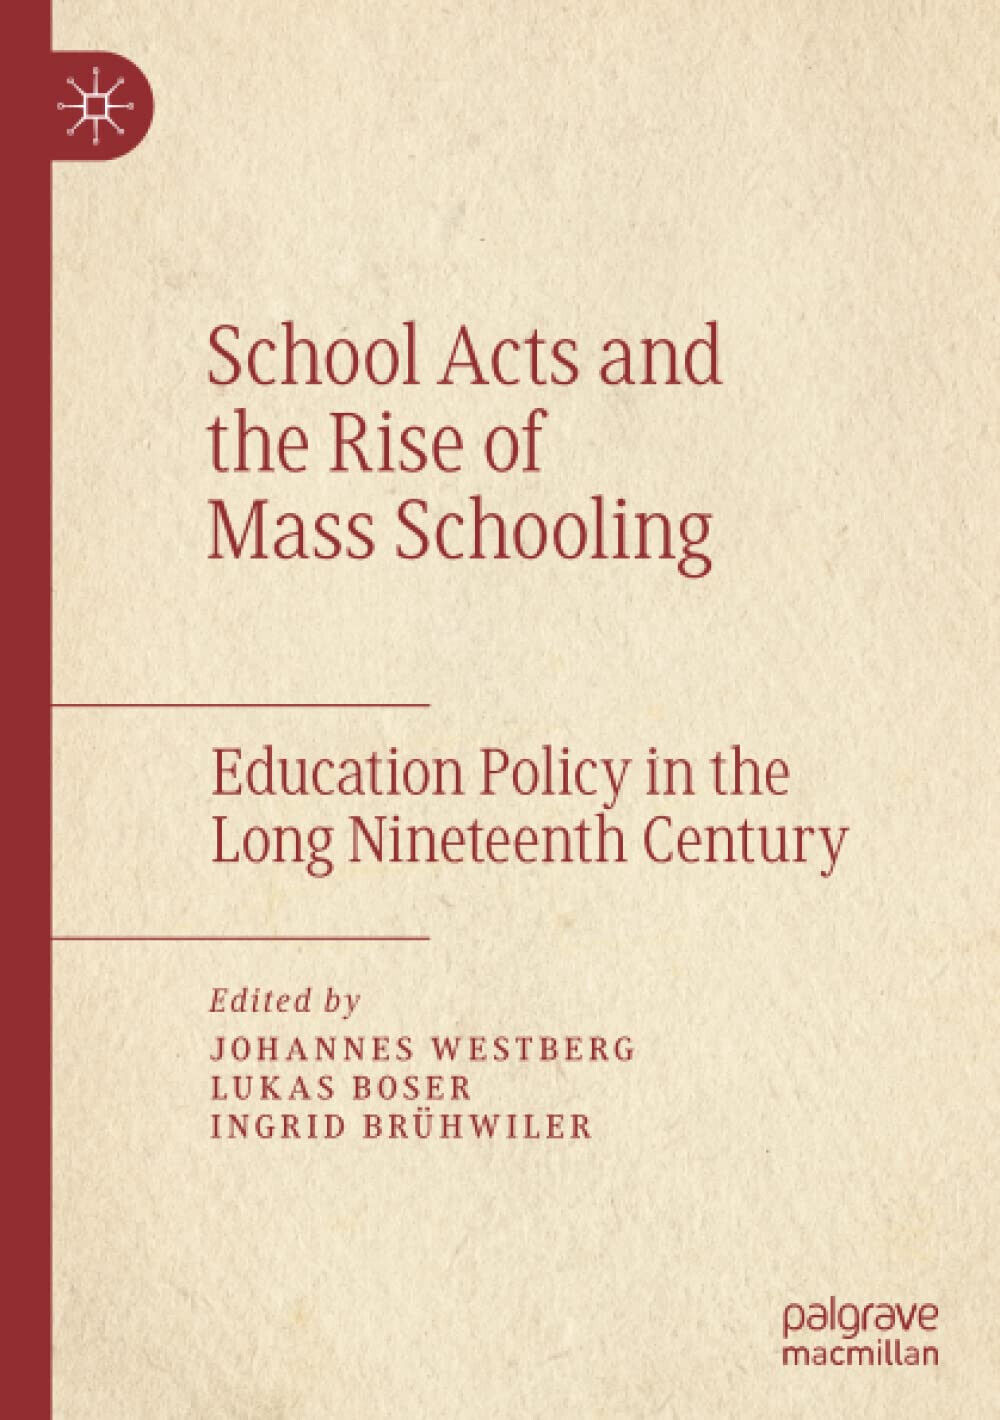 School Acts and the Rise of Mass Schooling - Johannes Westberg - Palgrave, 2019